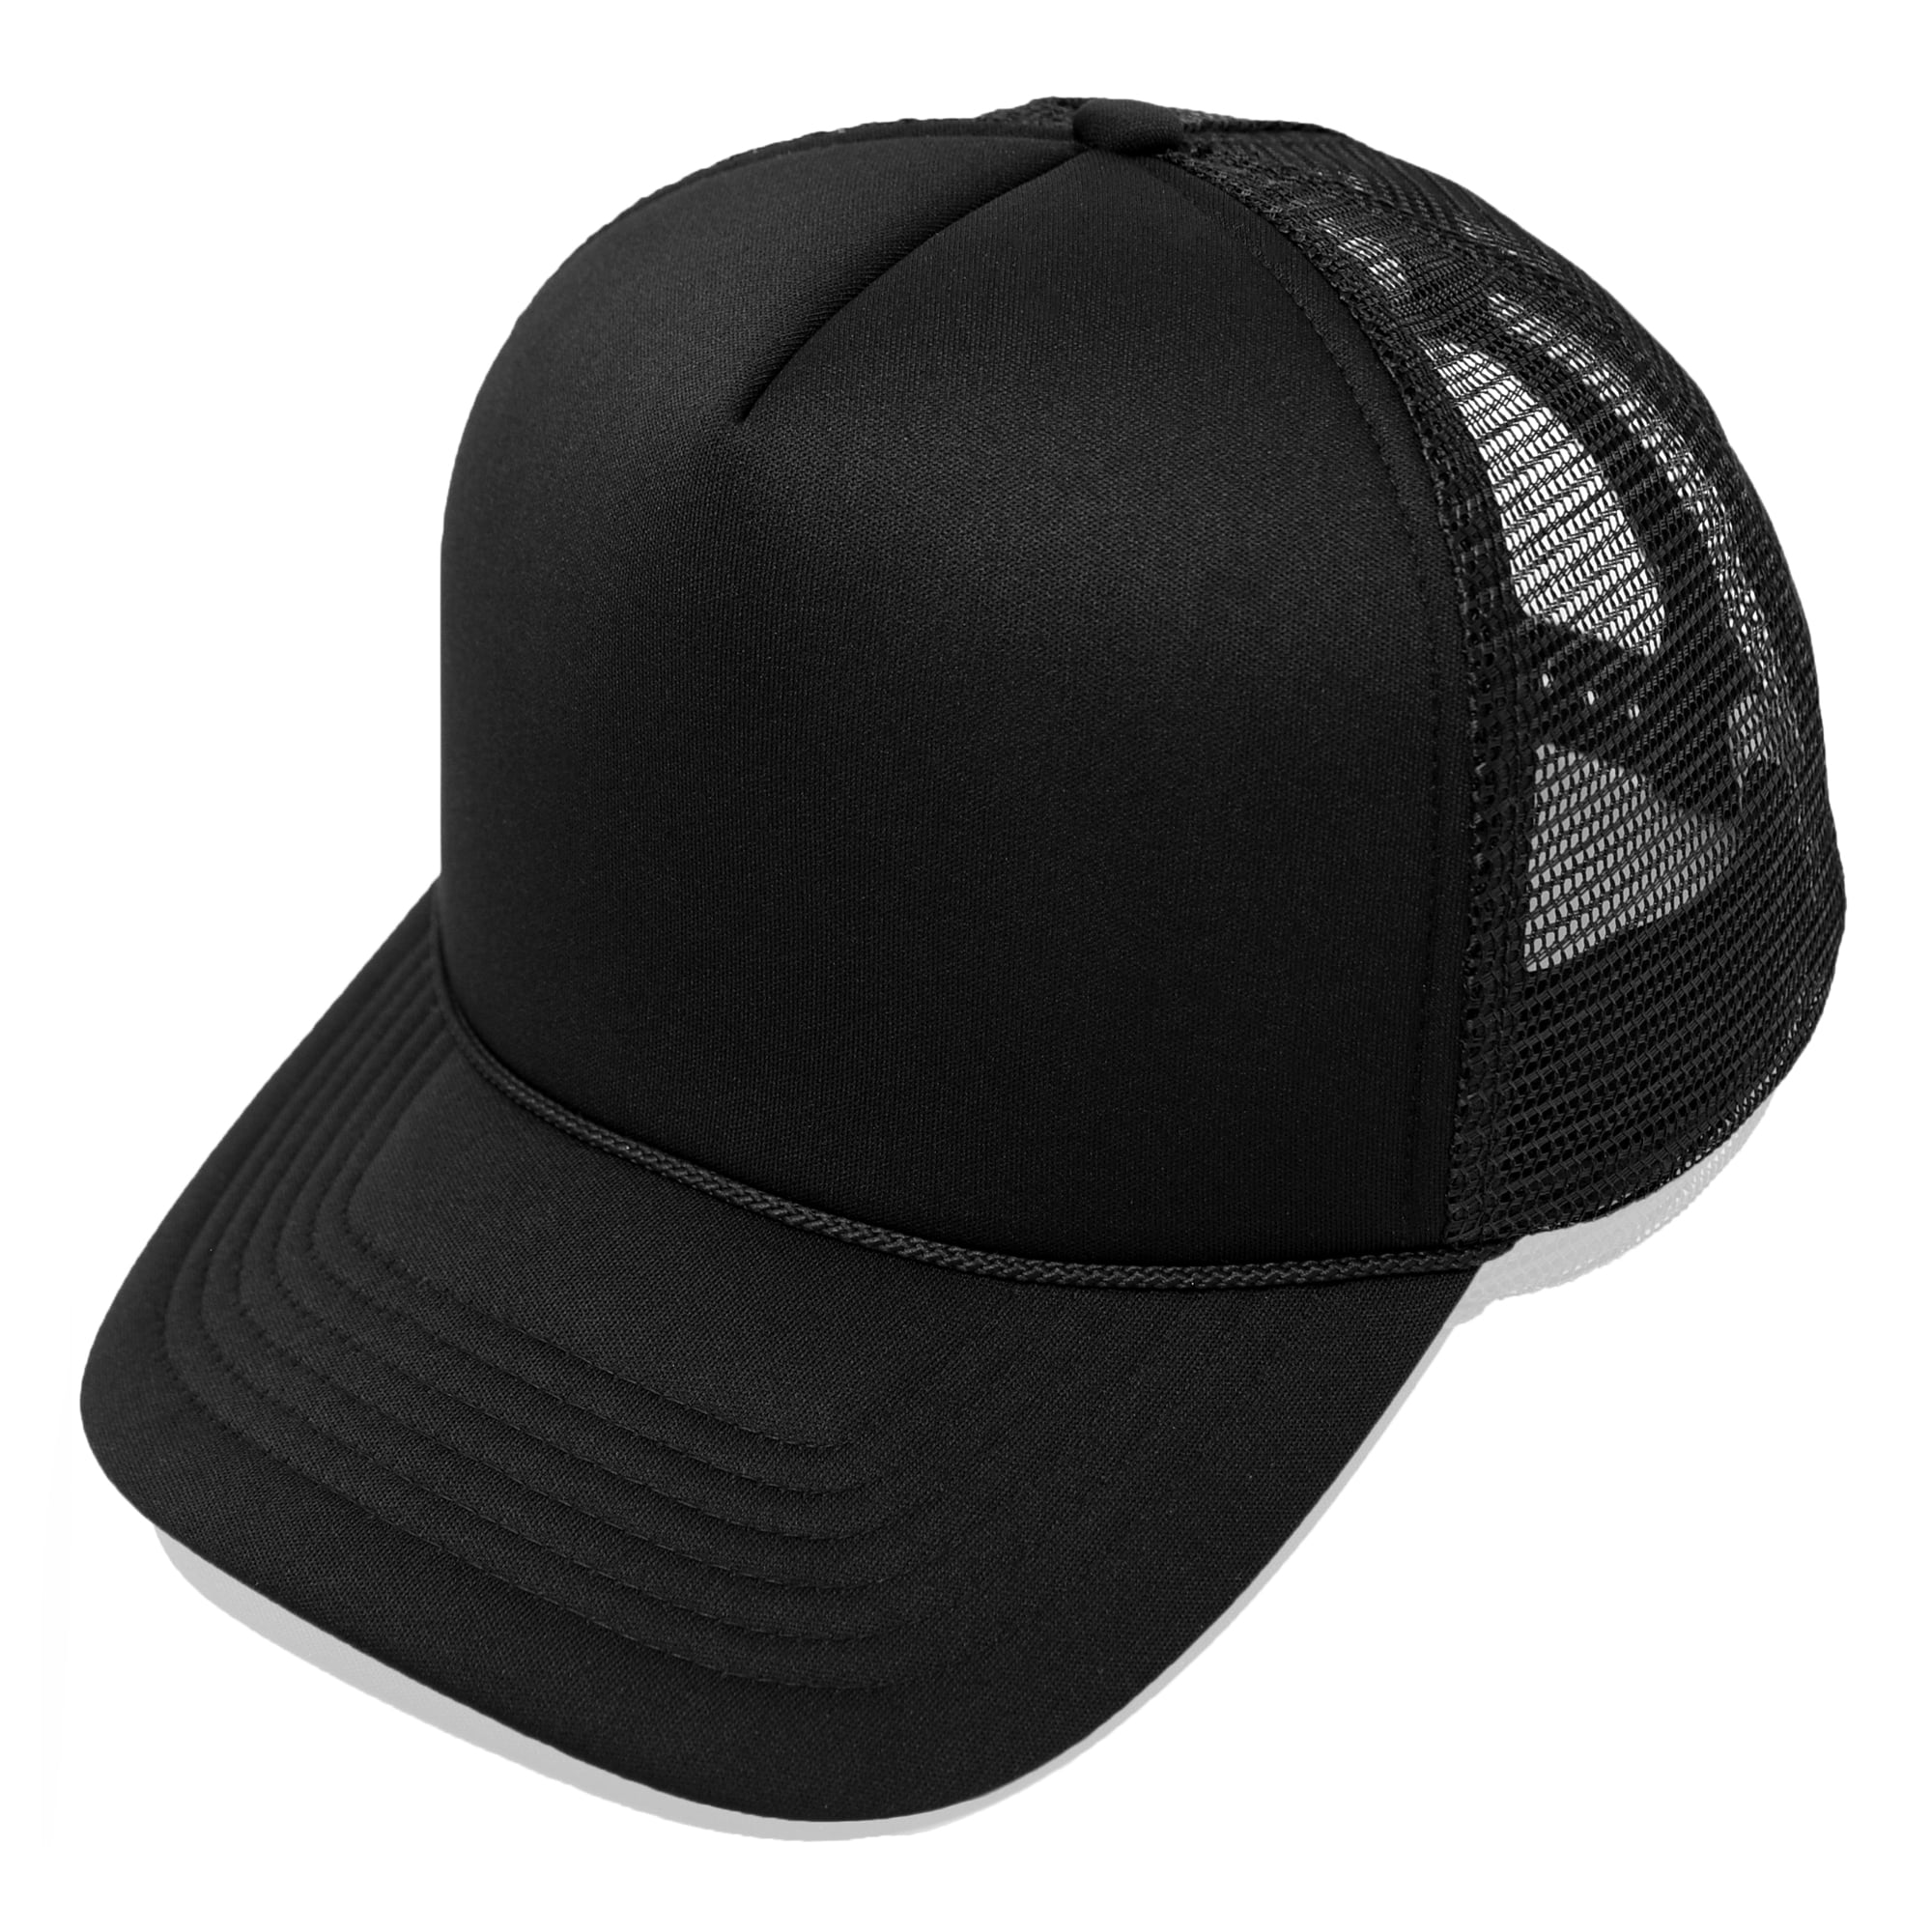 DALIX Trucker Cap Mesh Hat with Solid Colors and Adjustable Strap and ...